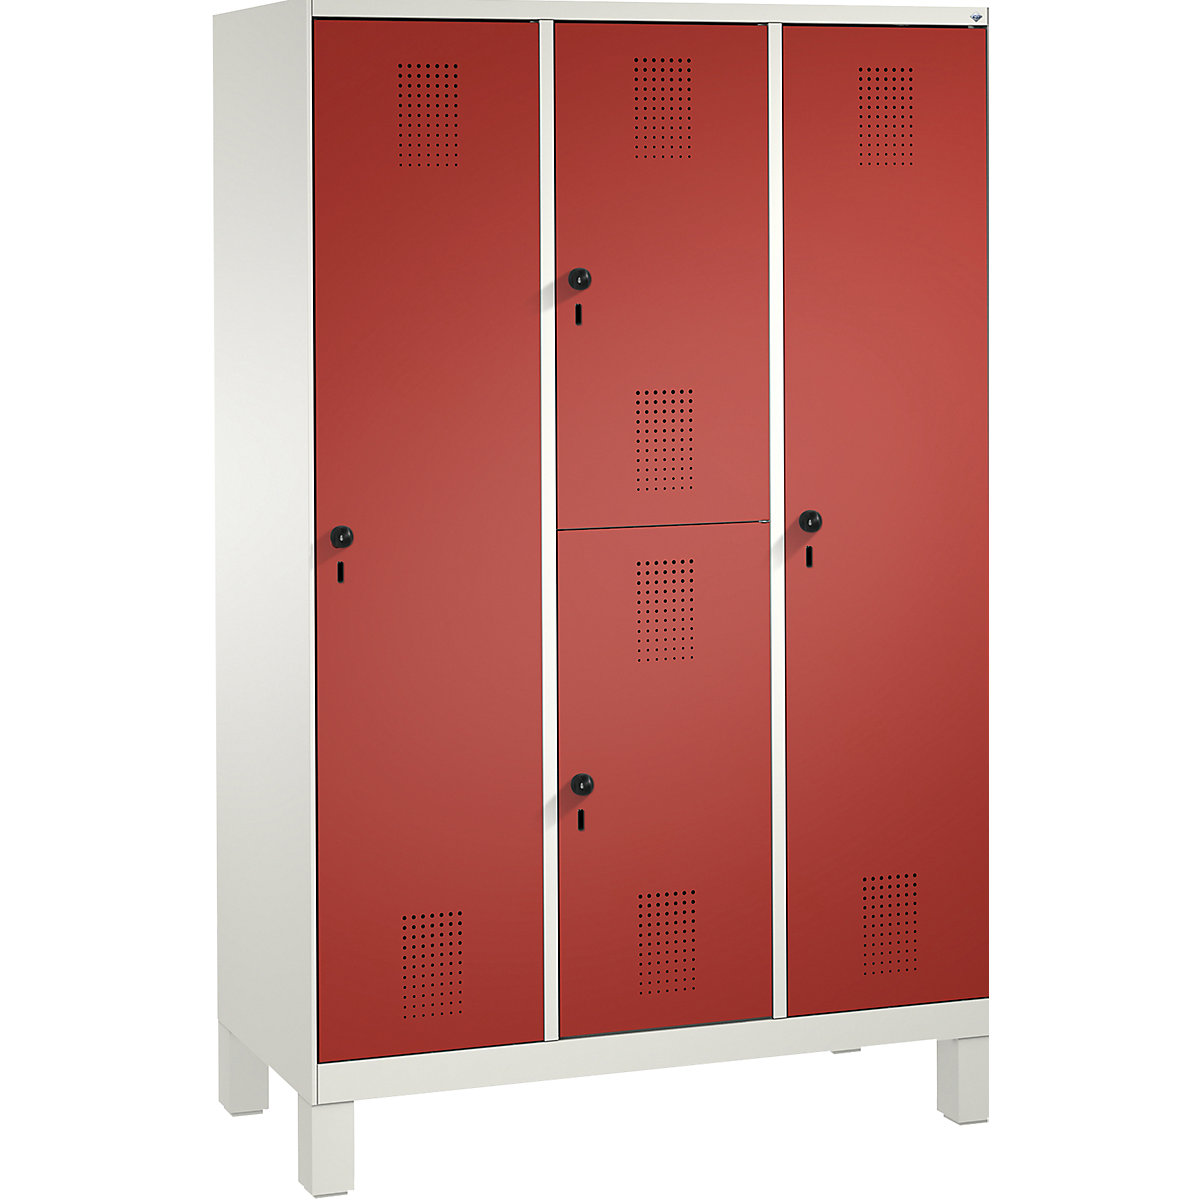 EVOLO combination cupboard, single and double tier – C+P, 3 compartments, 4 doors, compartment width 400 mm, with feet, traffic white / flame red